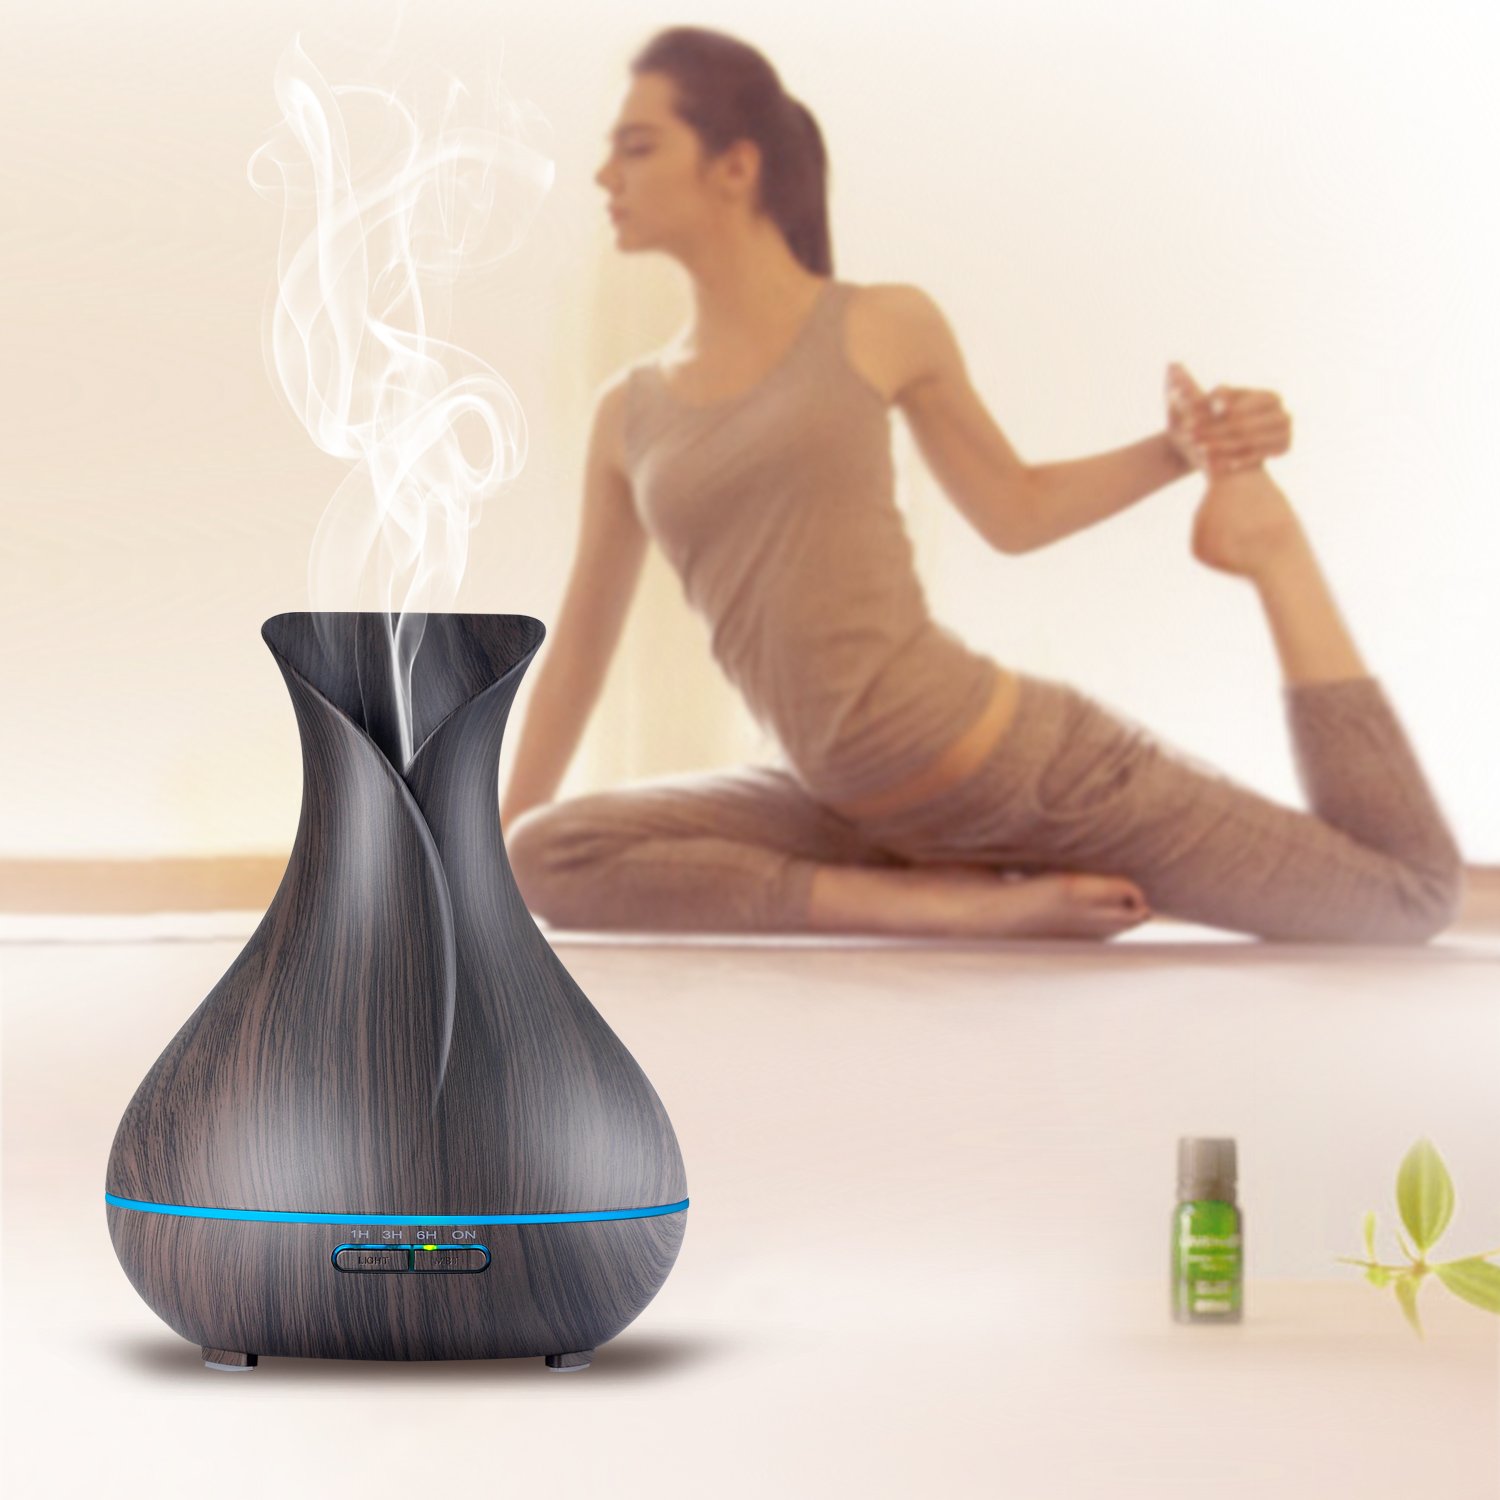 OliveTech Aroma Essential Oil Diffuser, 400ml Ultrasonic Cool Mist Humidifier with Waterless Auto Shut-Off and Cleaning Kit for Home, Yoga, Office, Spa, Bedroom, Baby Room - Wood Grain